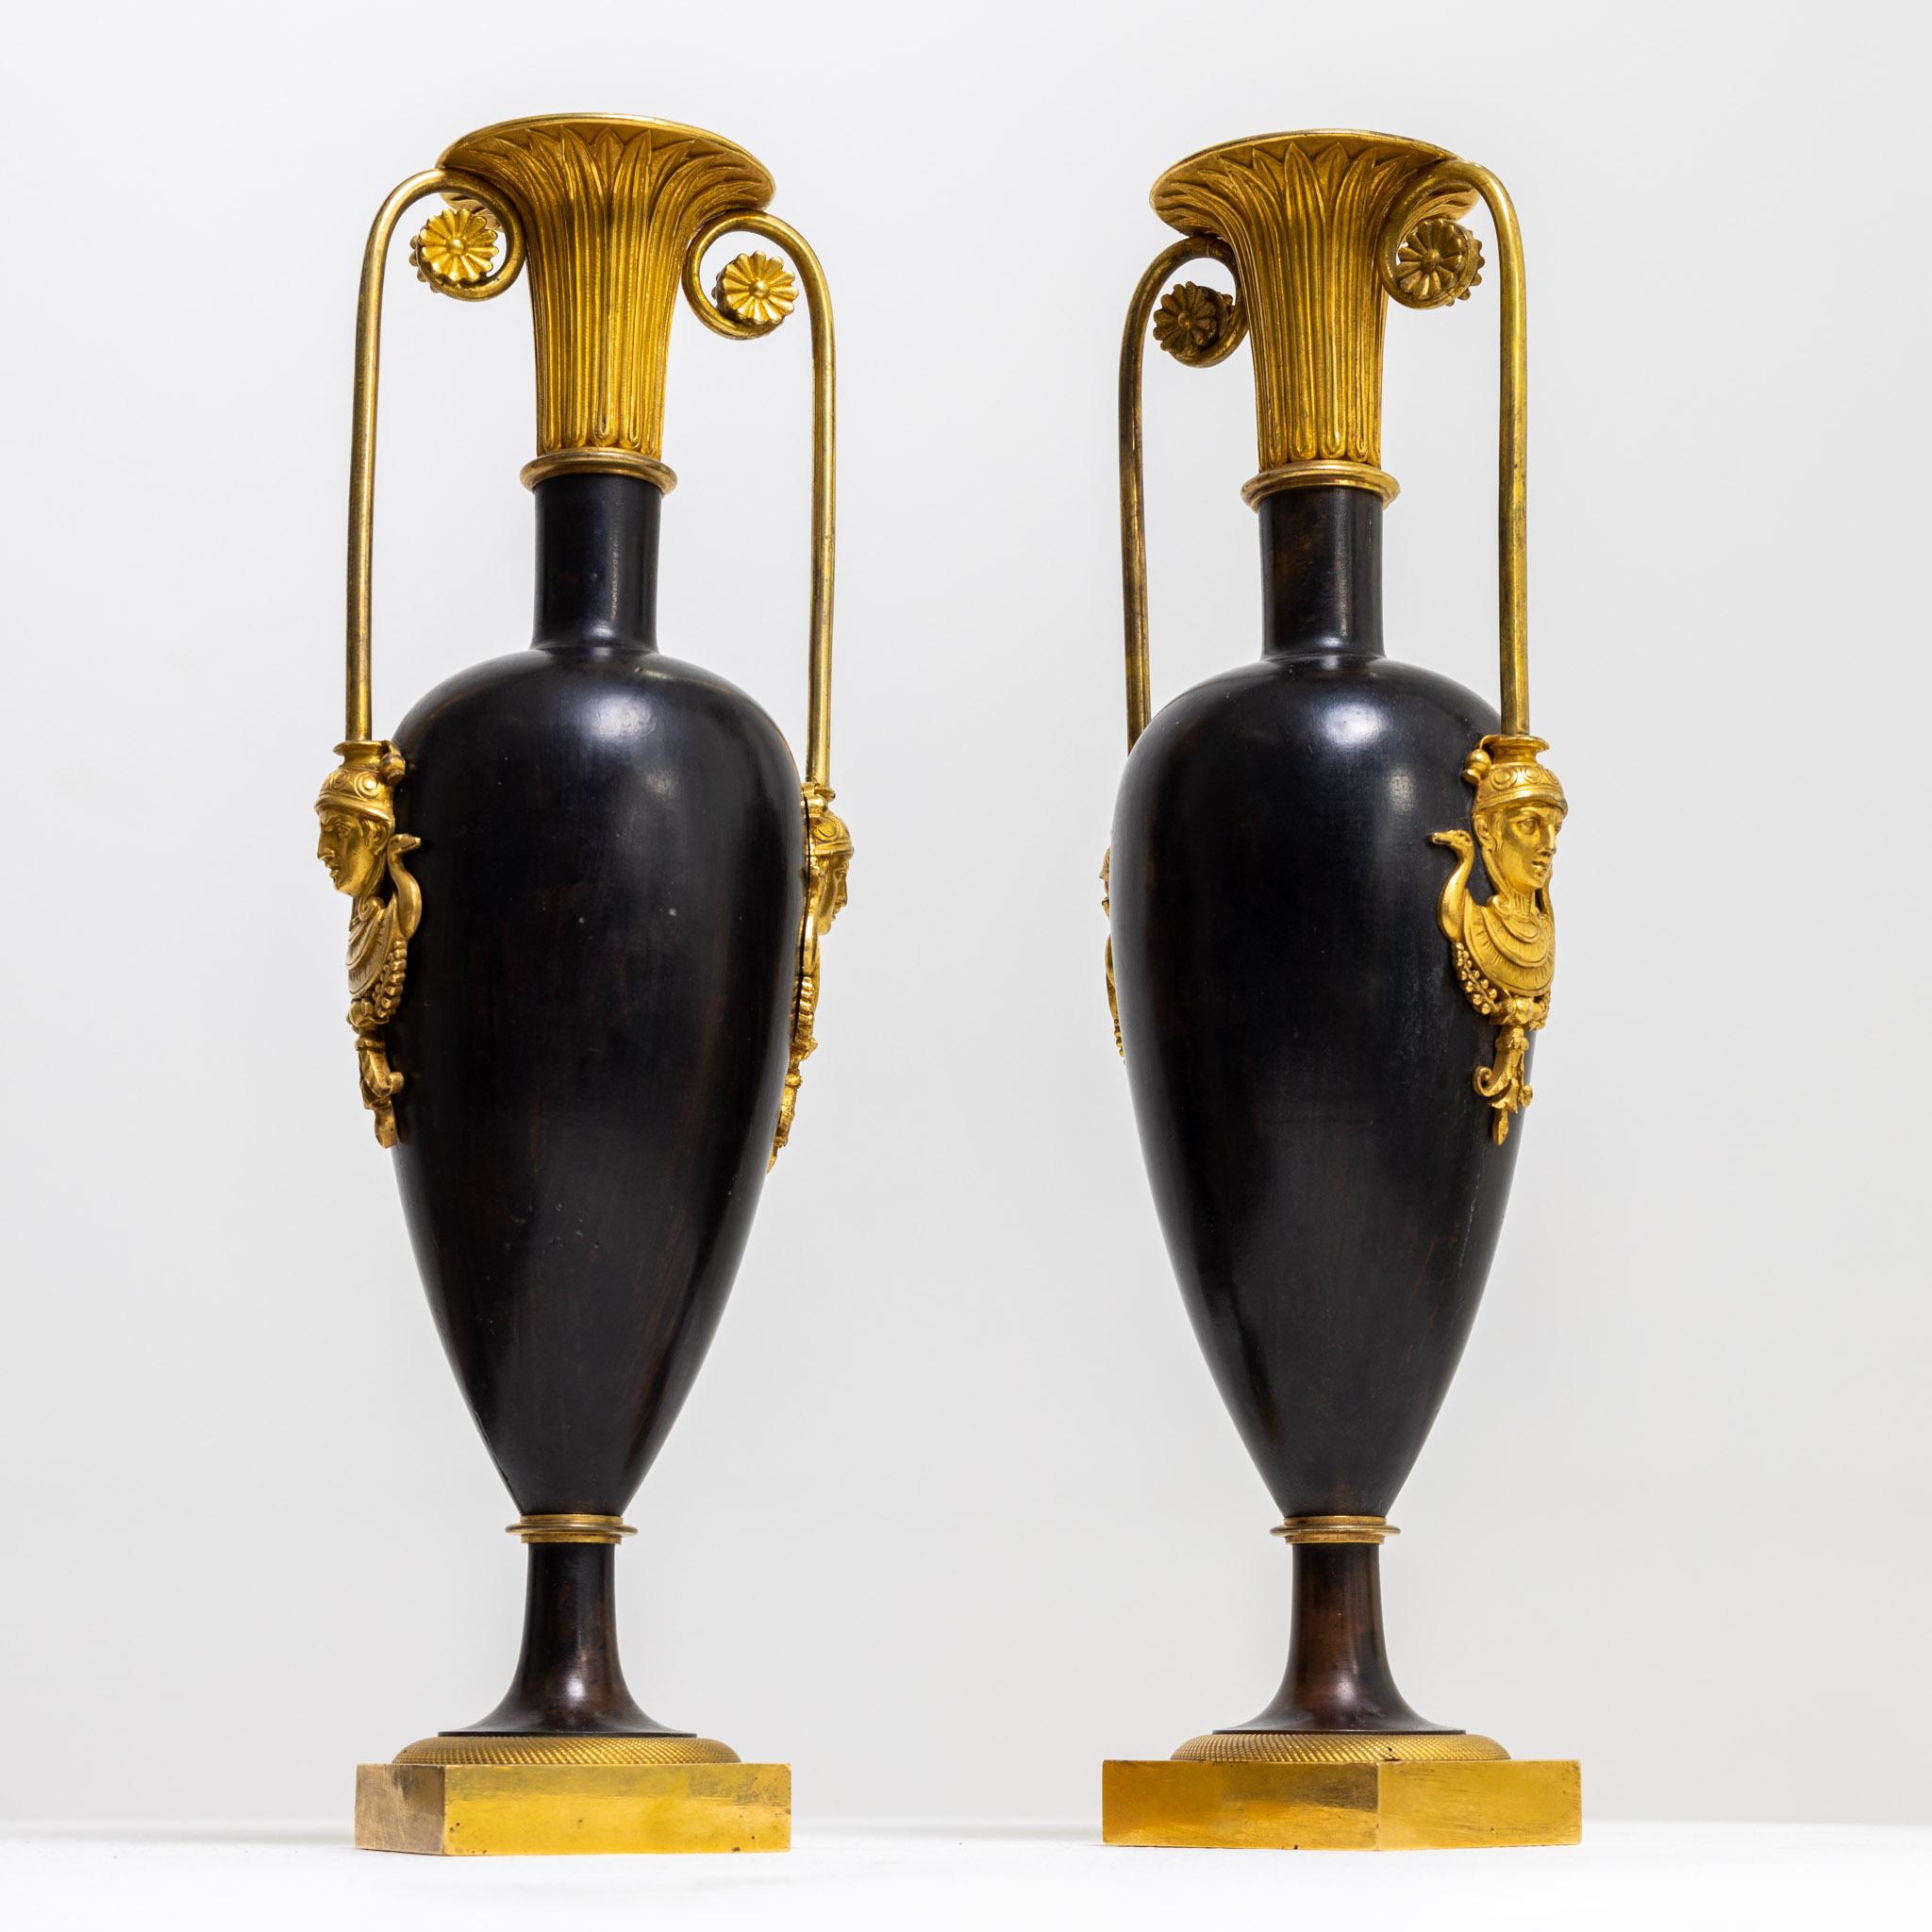 Pair of vases made of fire-gilded and burnished bronze with Retour d'Egypte-style decorative elements.